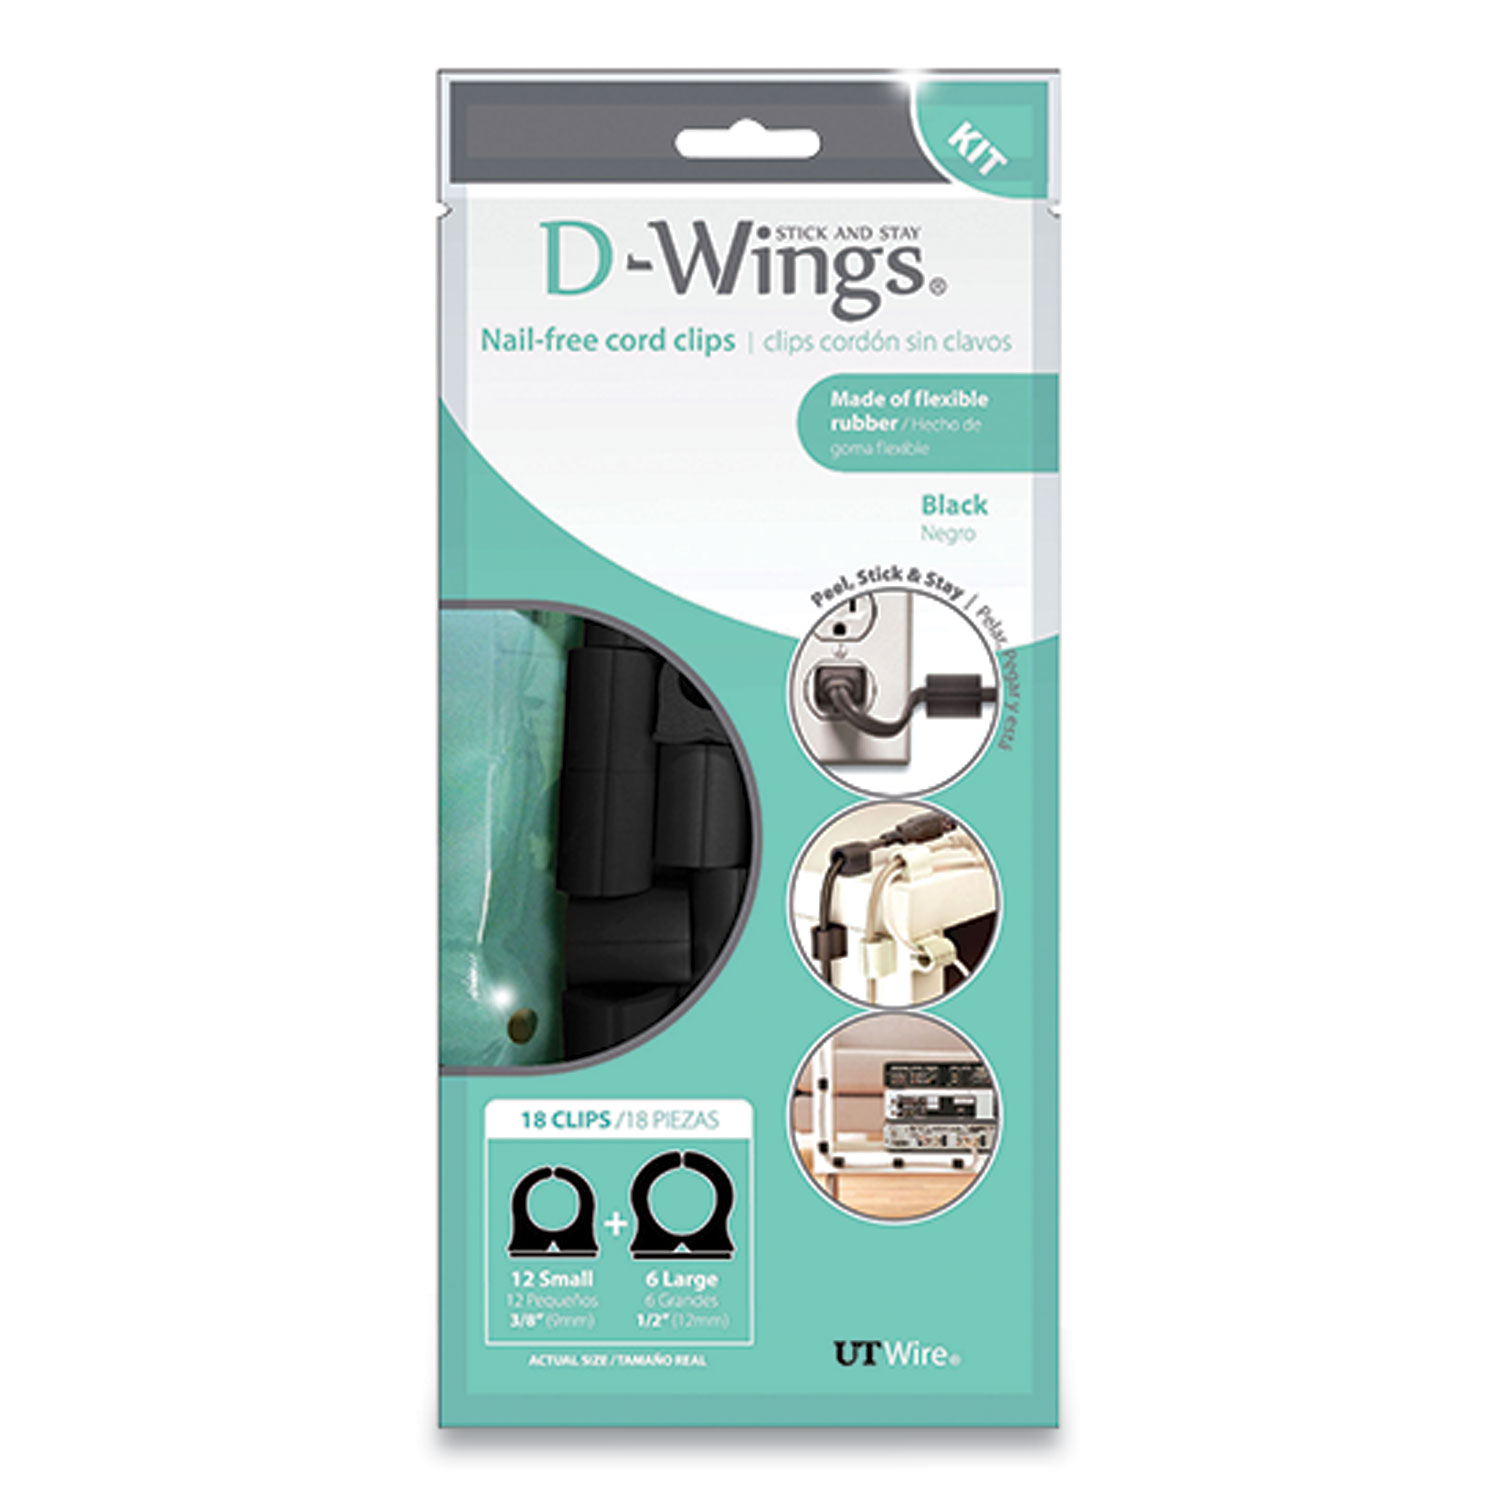 UT Wire® D-Wings Nail-Free Cord Clips, 12 Small 0.38, Six Large 0.5, Black, 18/Pack